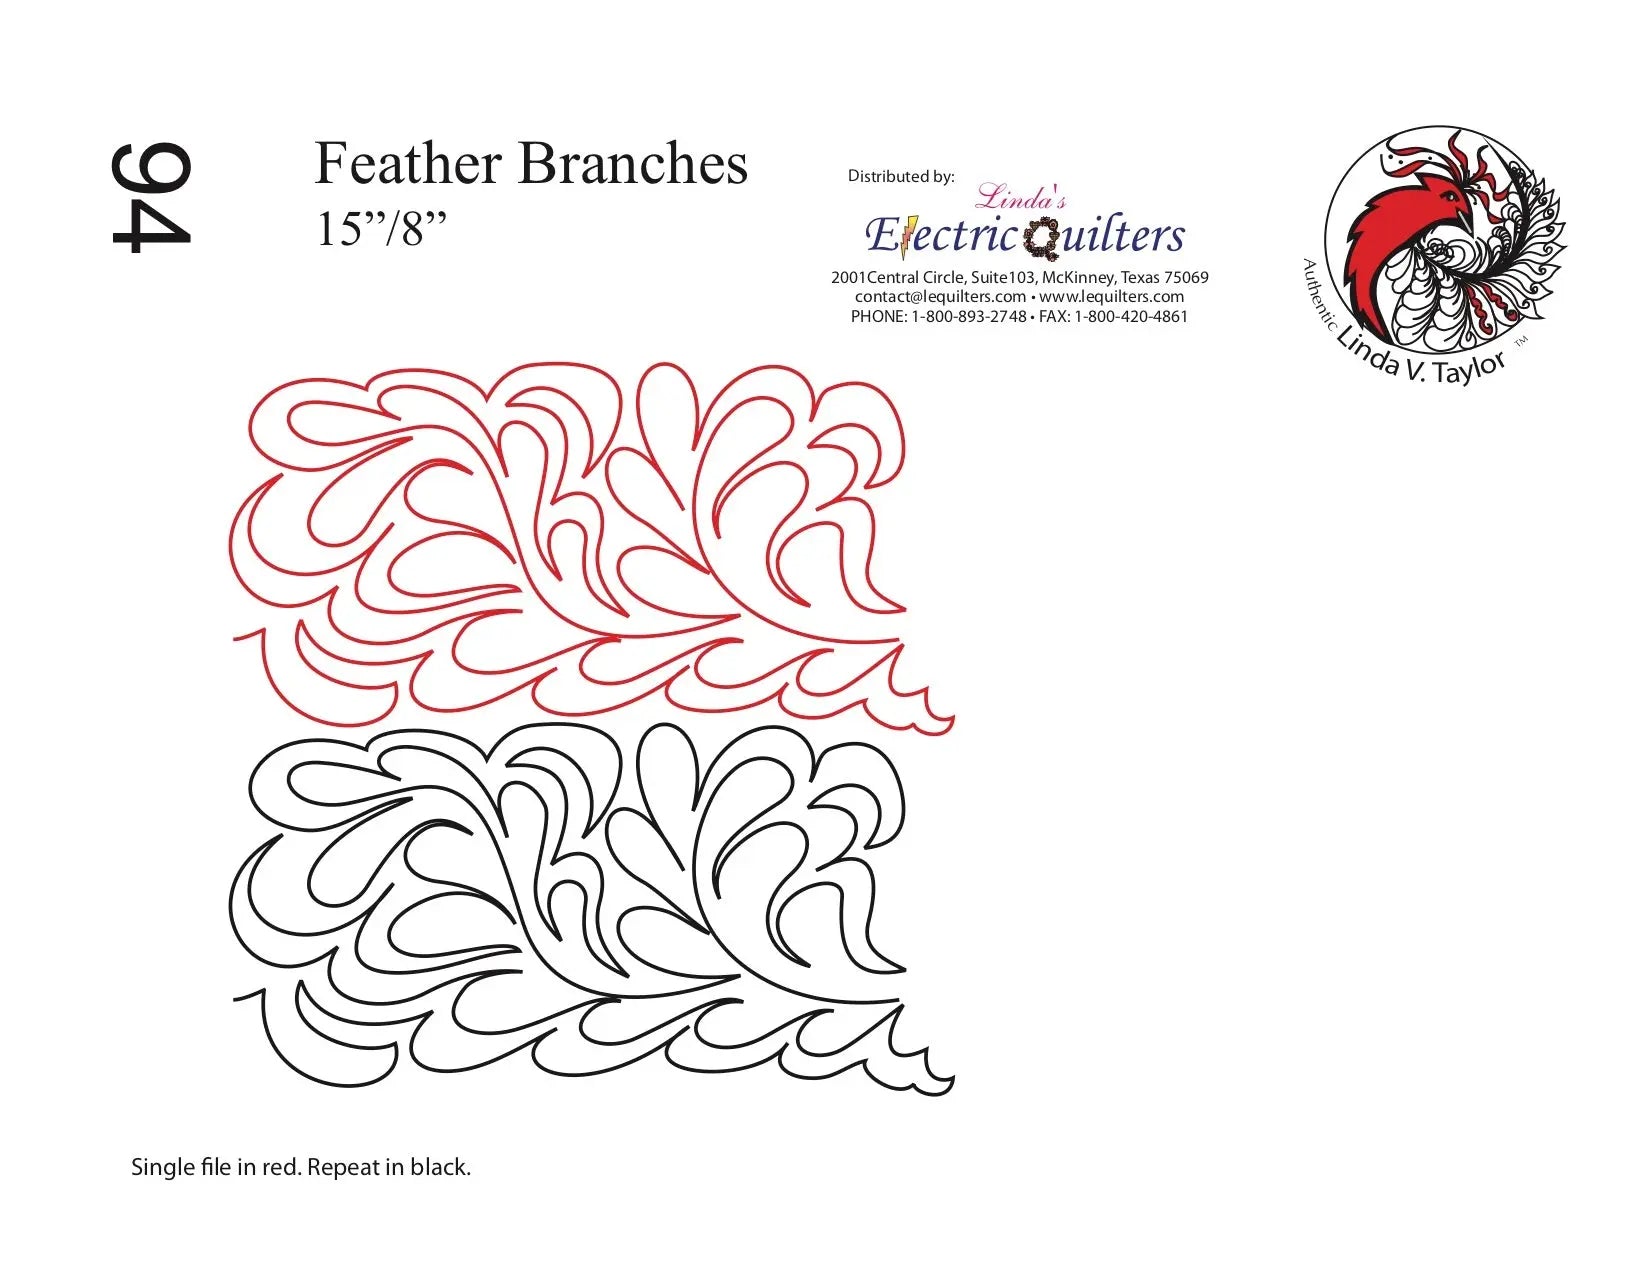 094 Feather Branches Pantograph by Linda V. Taylor - Linda's Electric Quilters